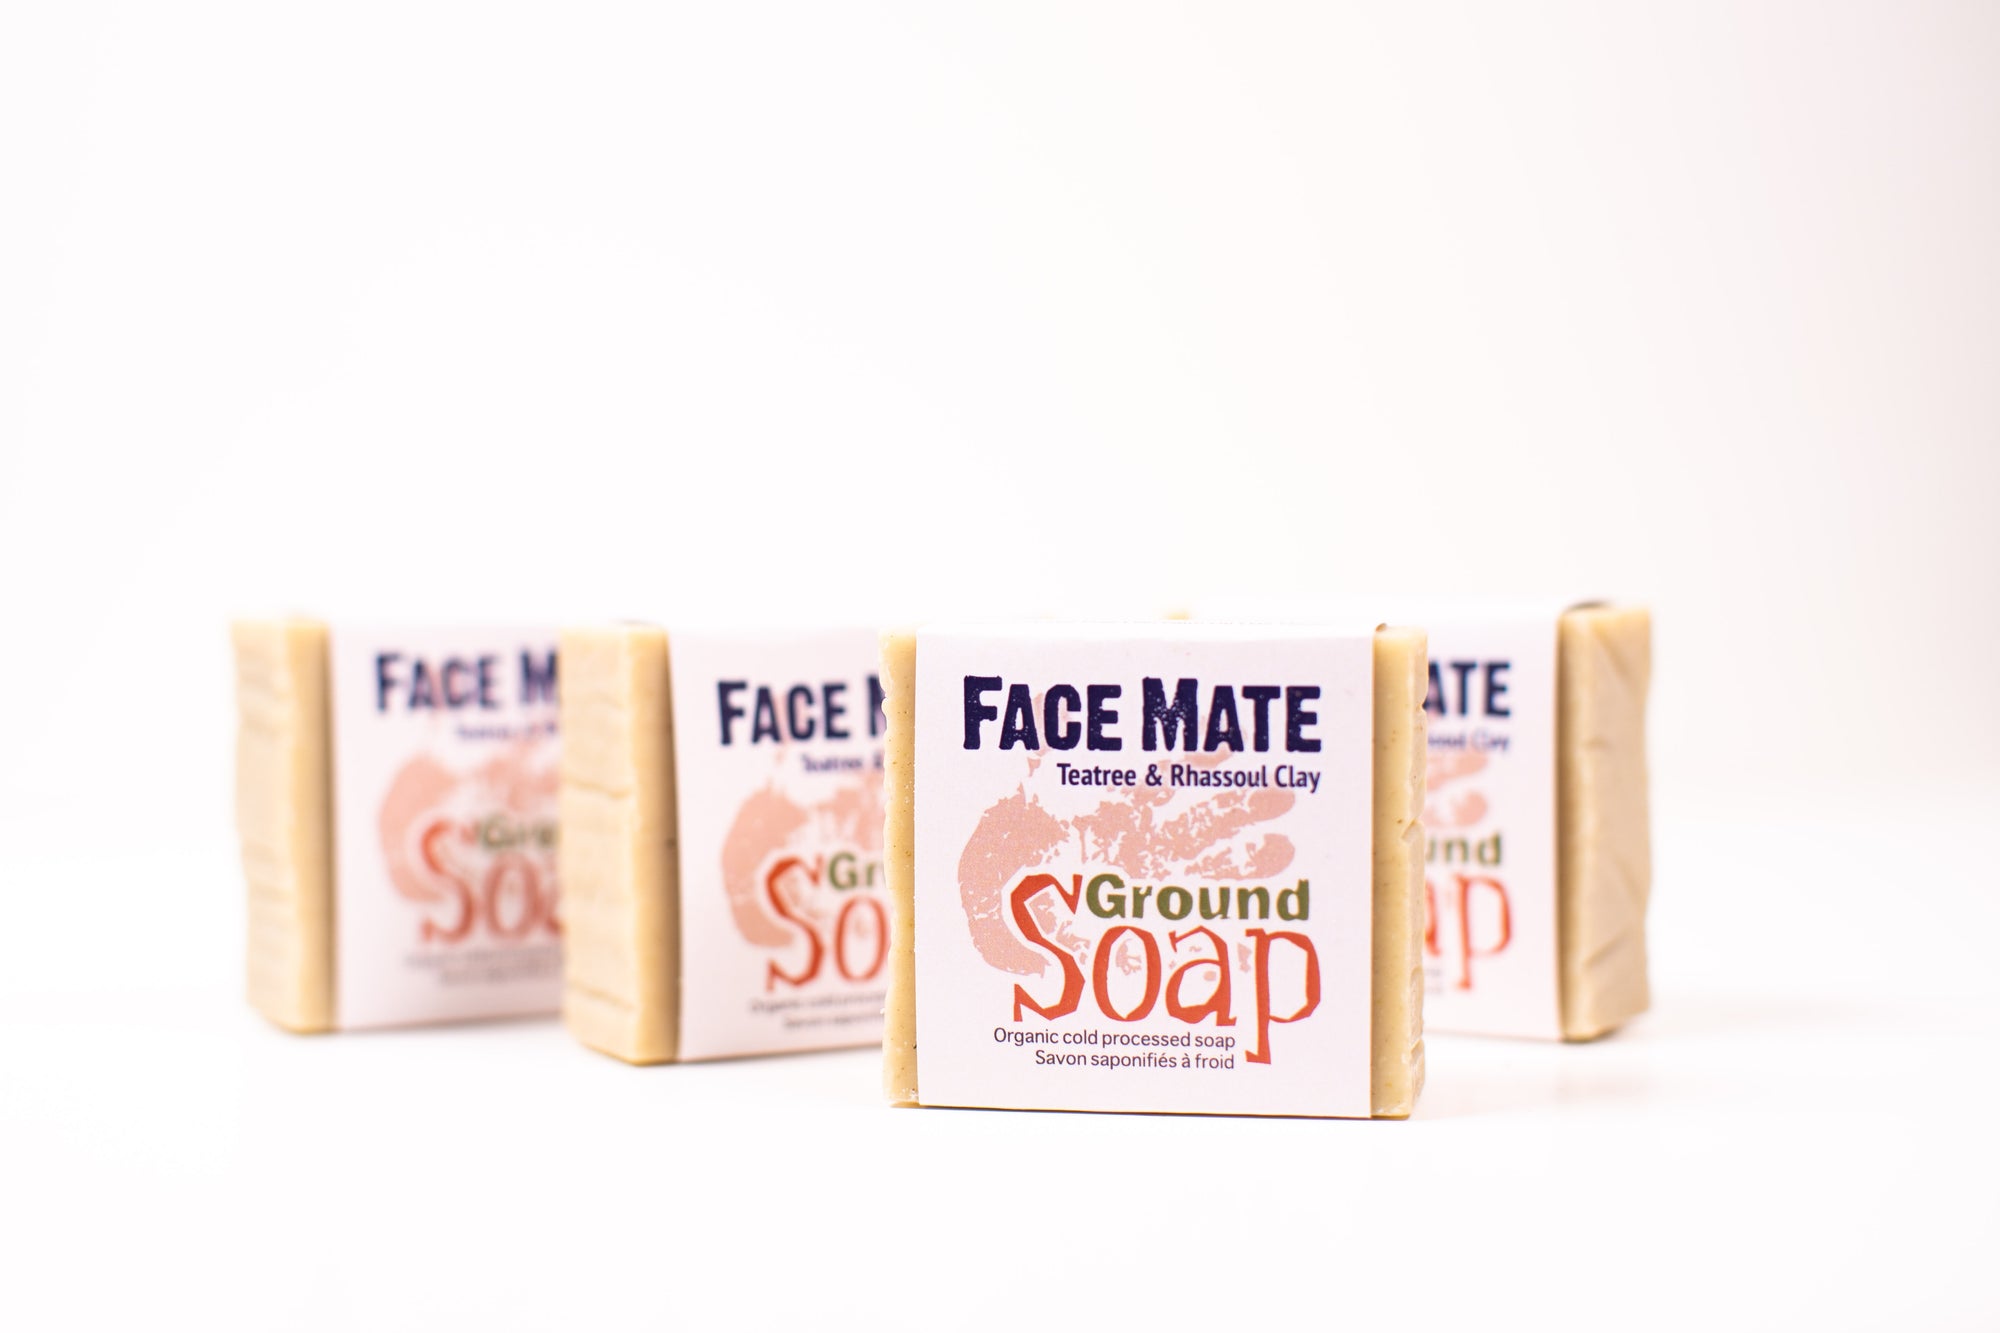 Face Mate - Teatree Oil & Rhassoul Clay -  Small Size Organic Bar Soap